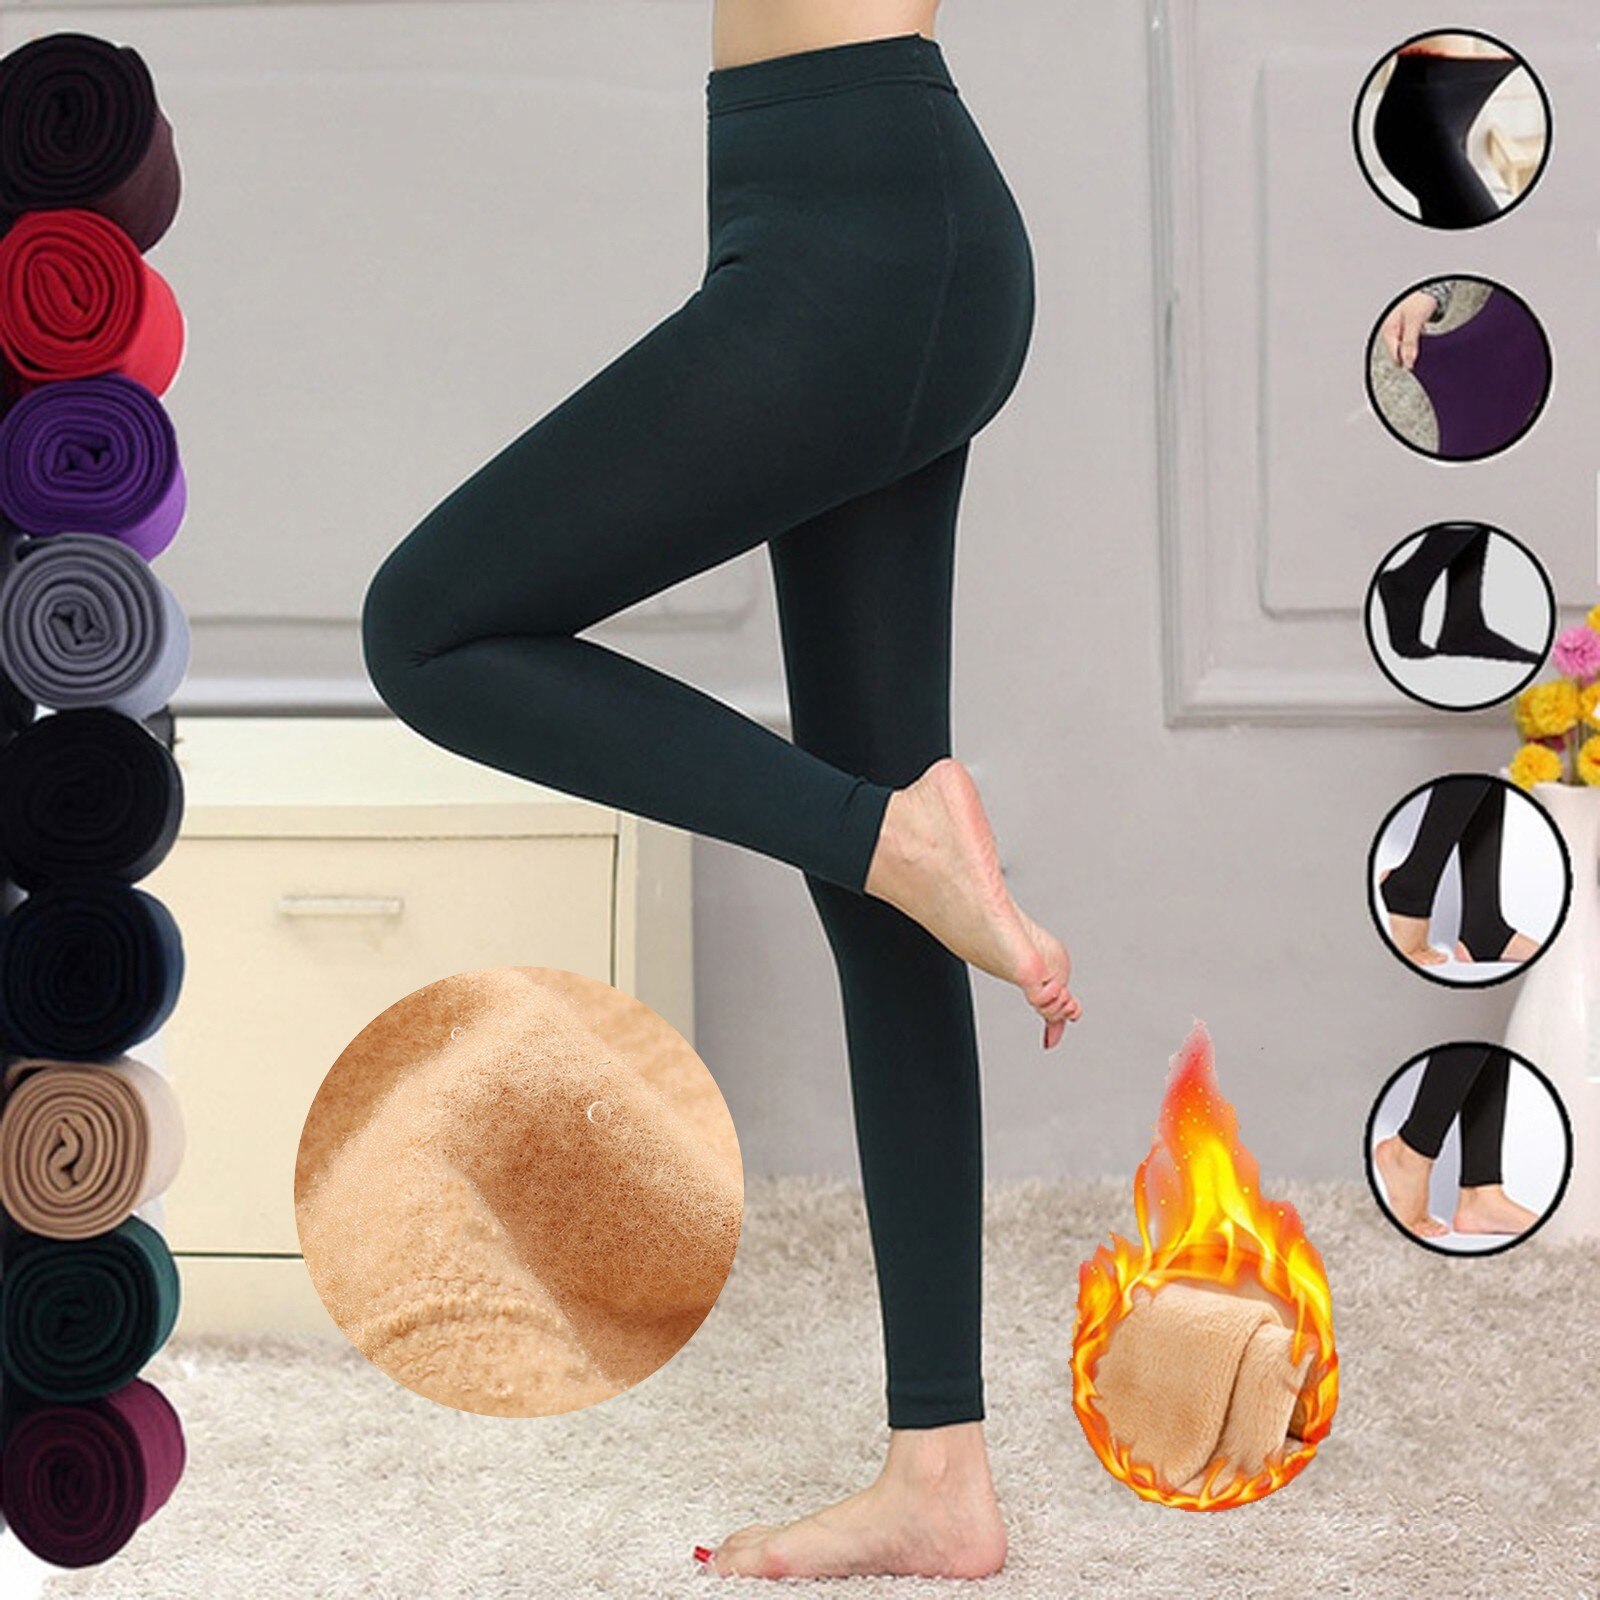 Fleece Lined Thick Tights Fashion Leggings Women Winter Warm Pants Stretchy  Warm Comfy Yoga Pants Seamless Leggings Ко size One size Color Black